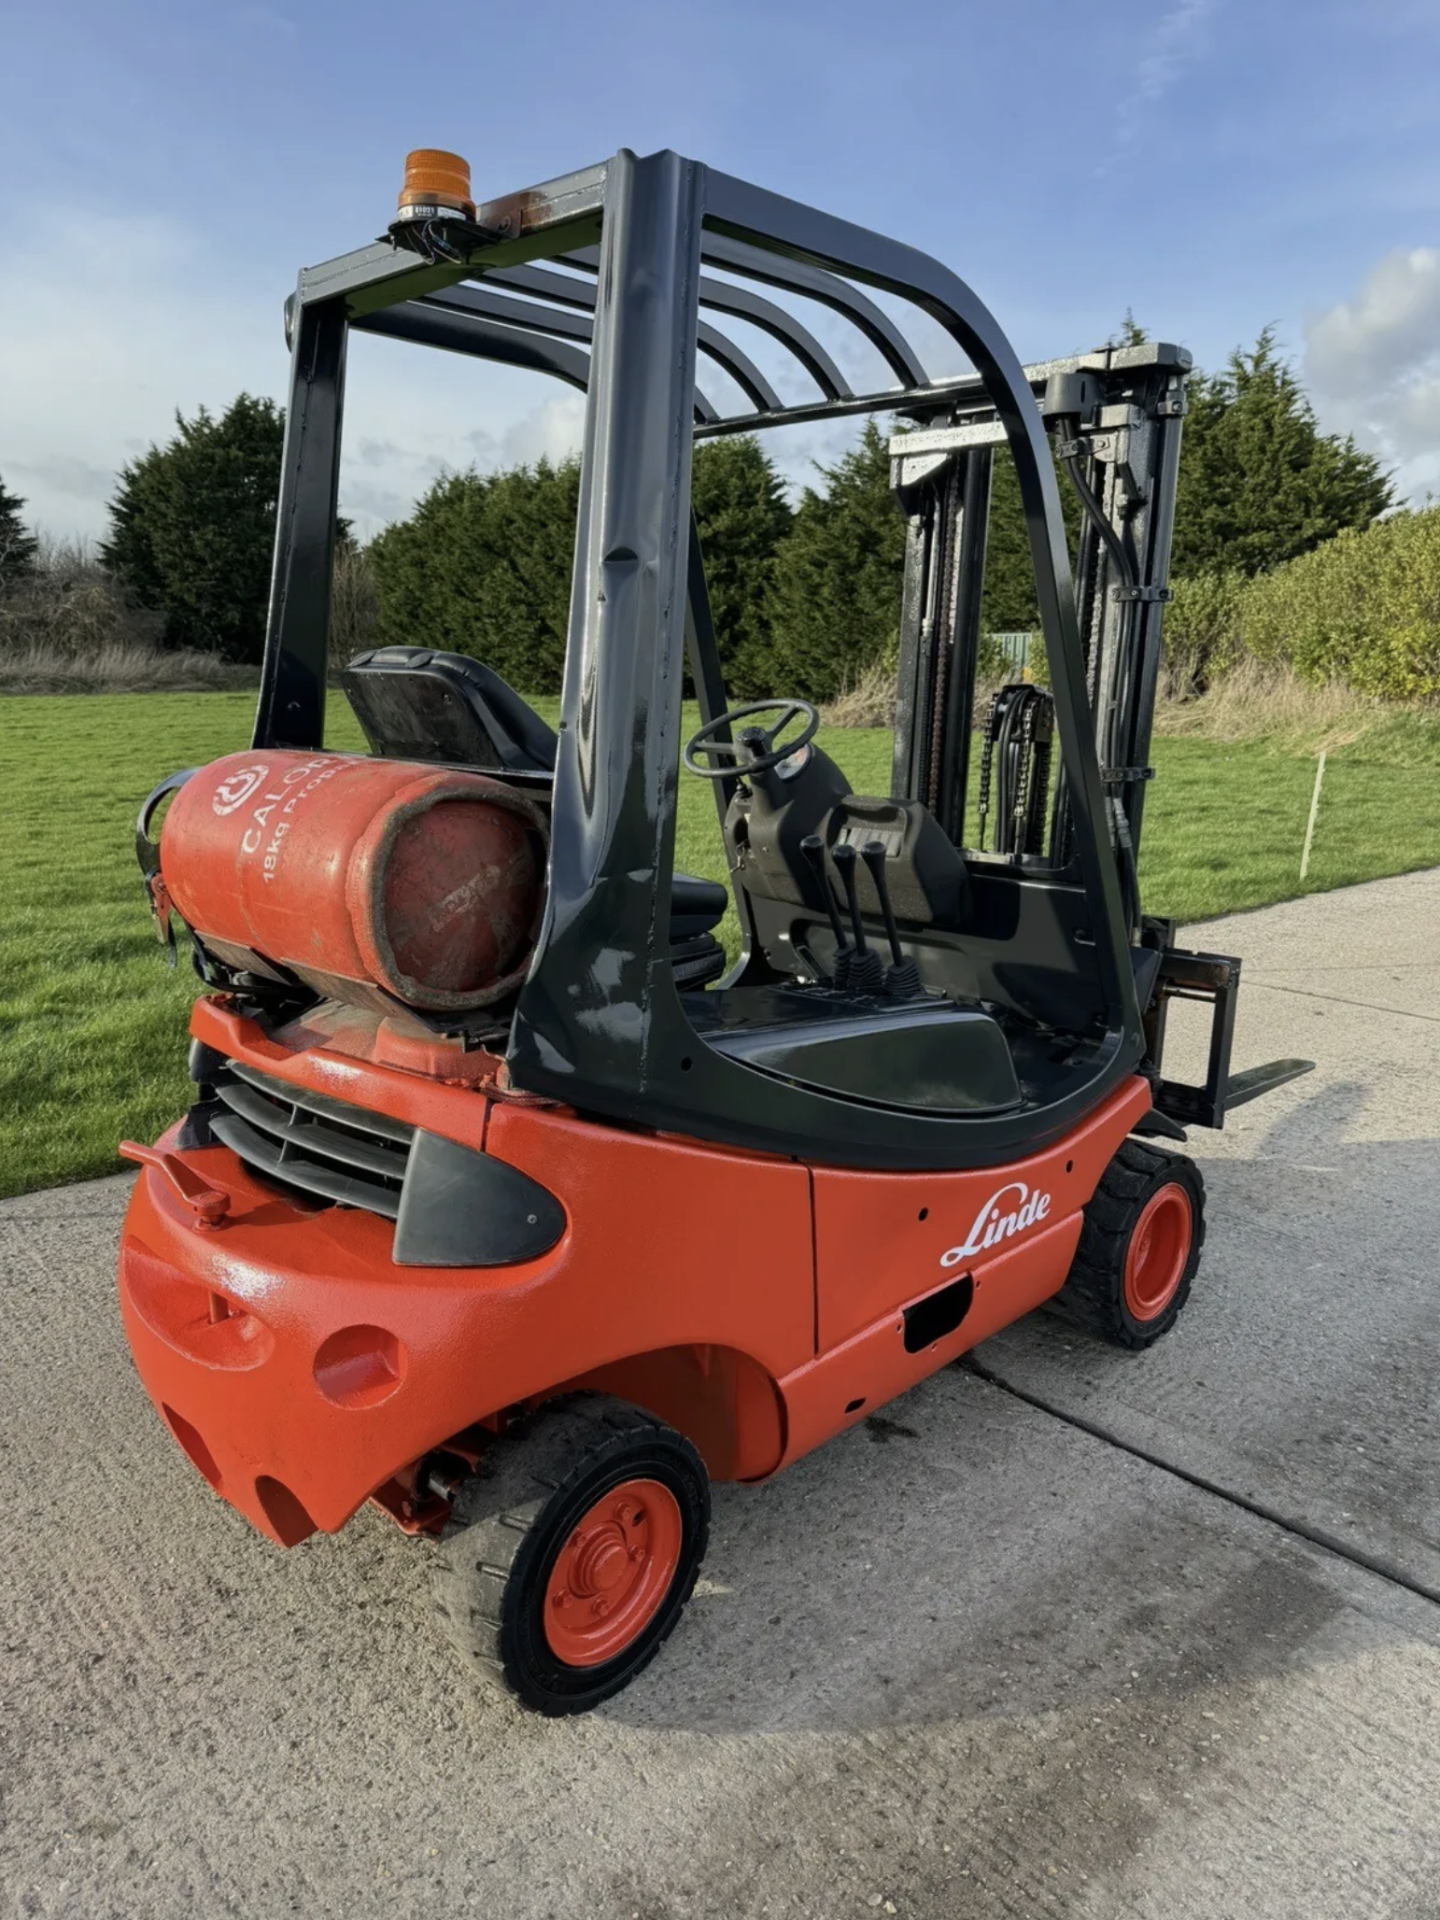 LINDE - H18 Gas Forklift (container spec - 8064 hours) - Image 2 of 5